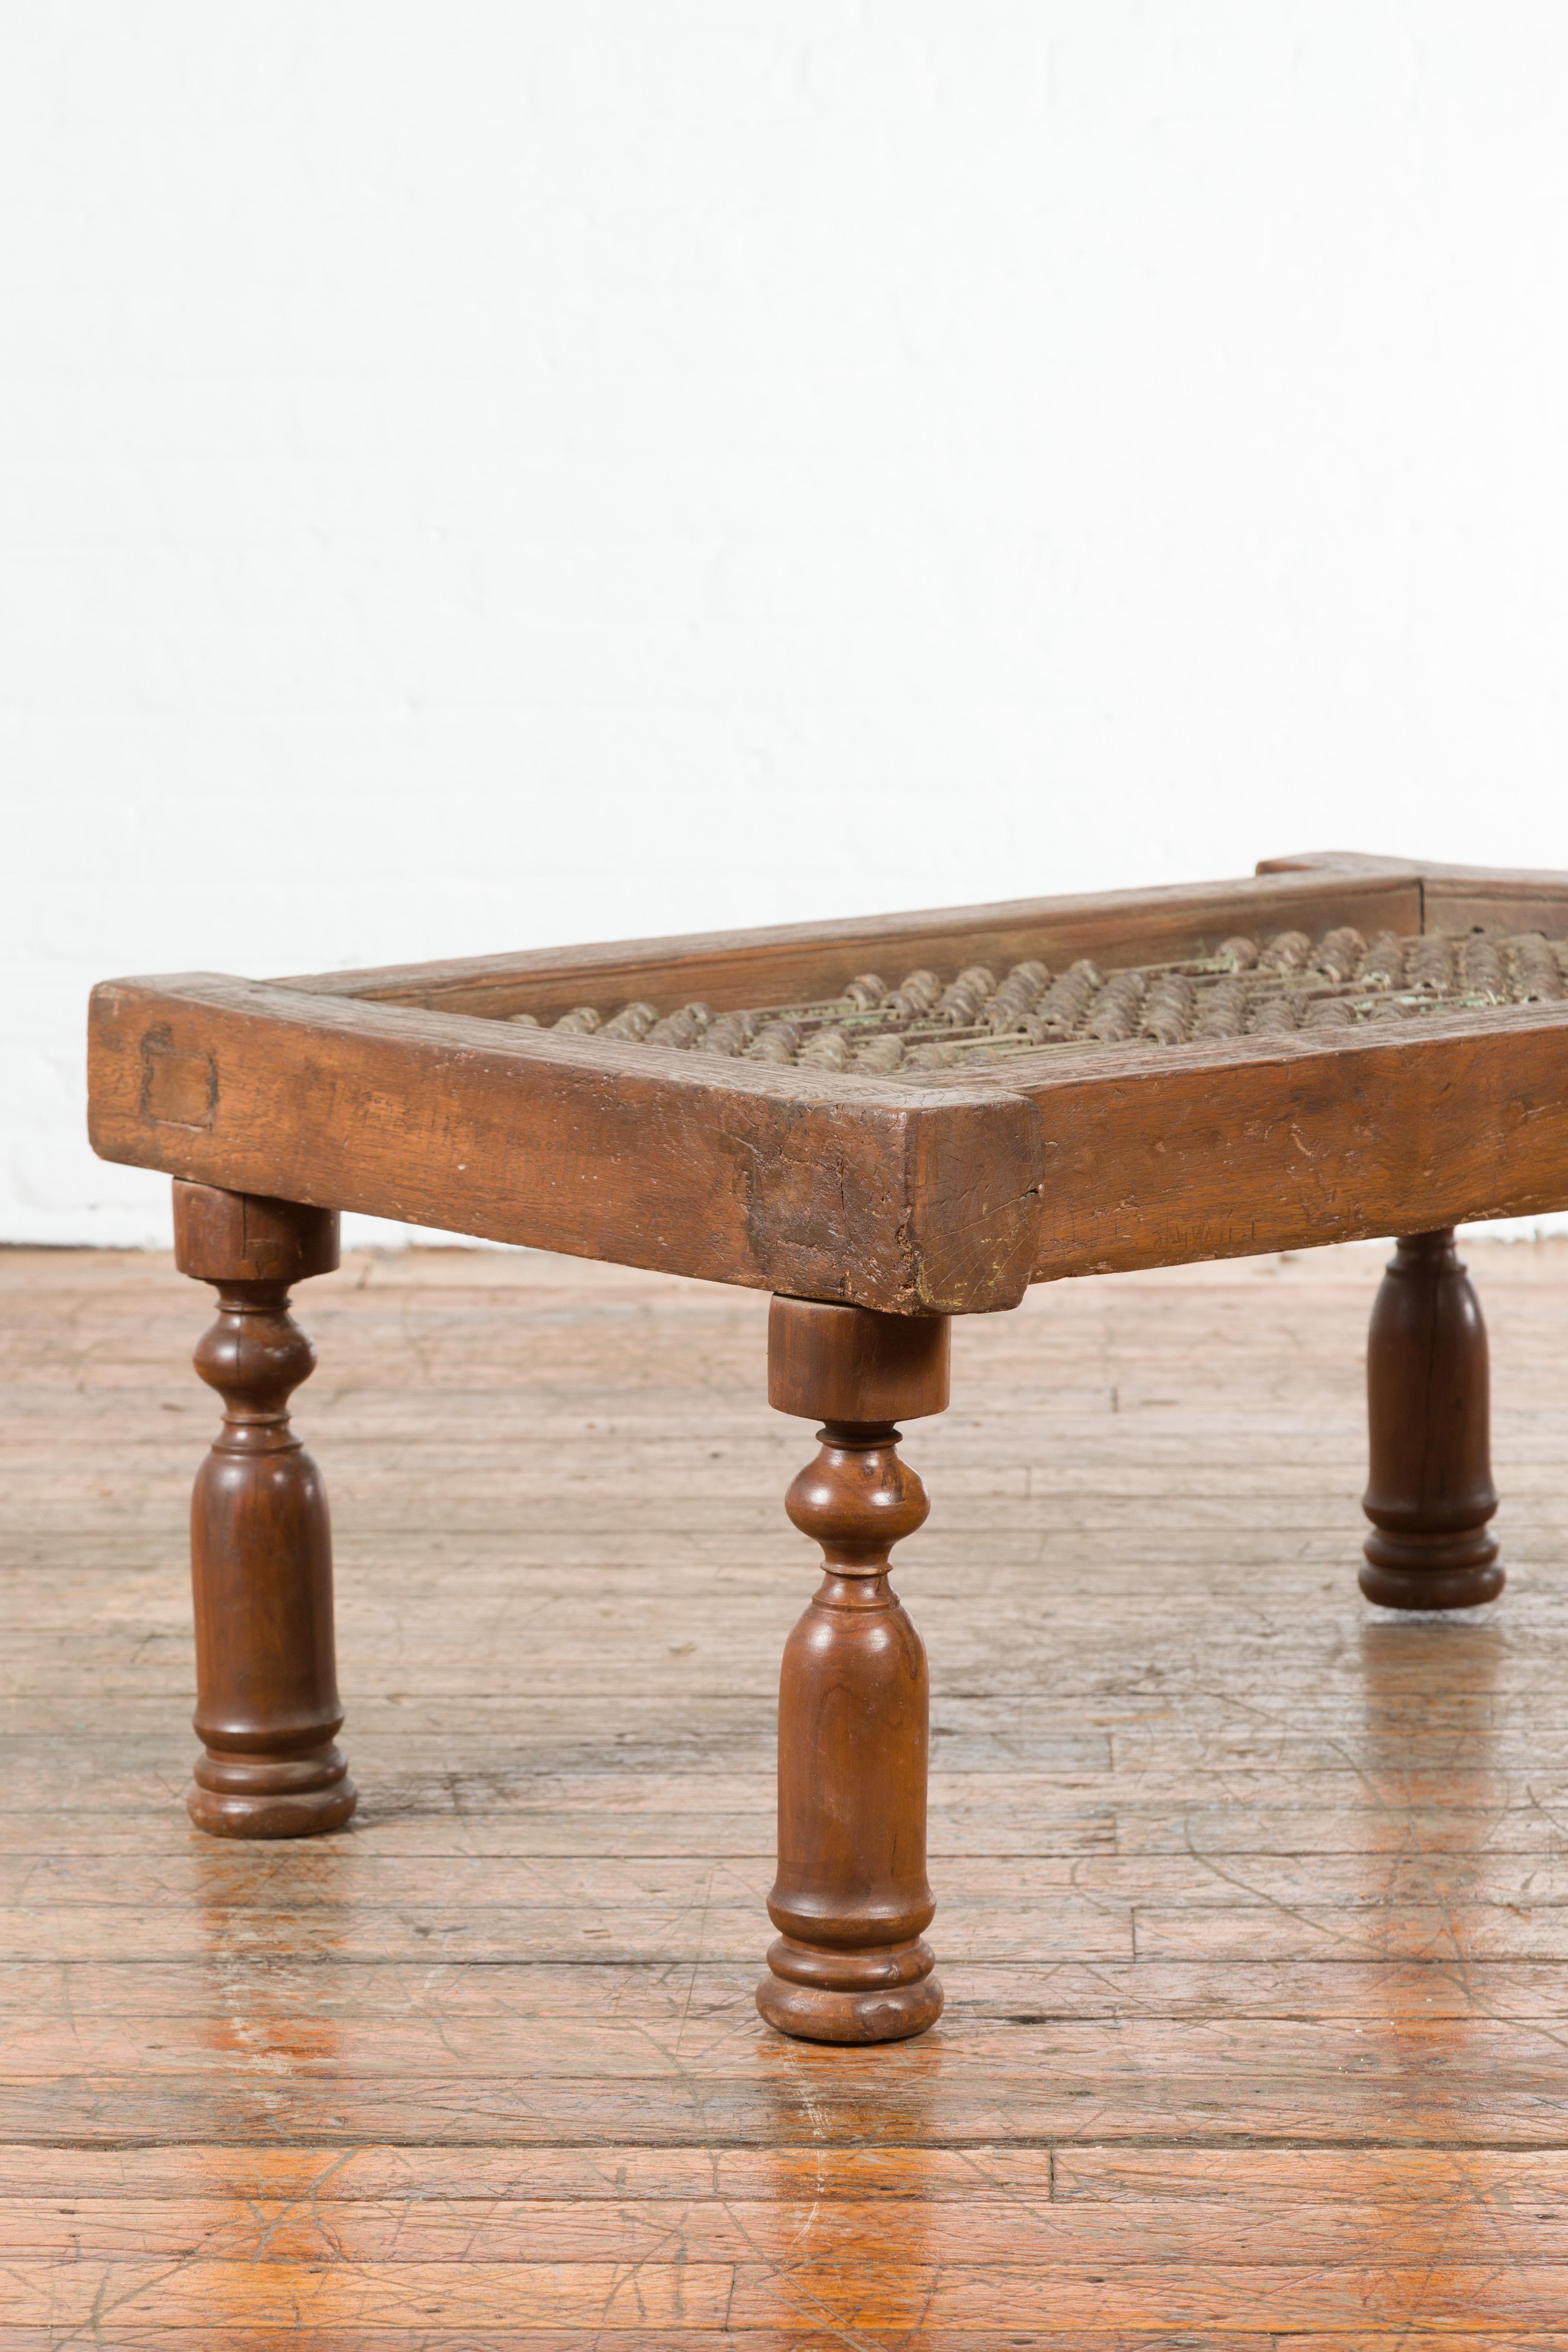 Metal Antique Indian Arched Window Grate Made into a Coffee Table with Baluster Legs For Sale